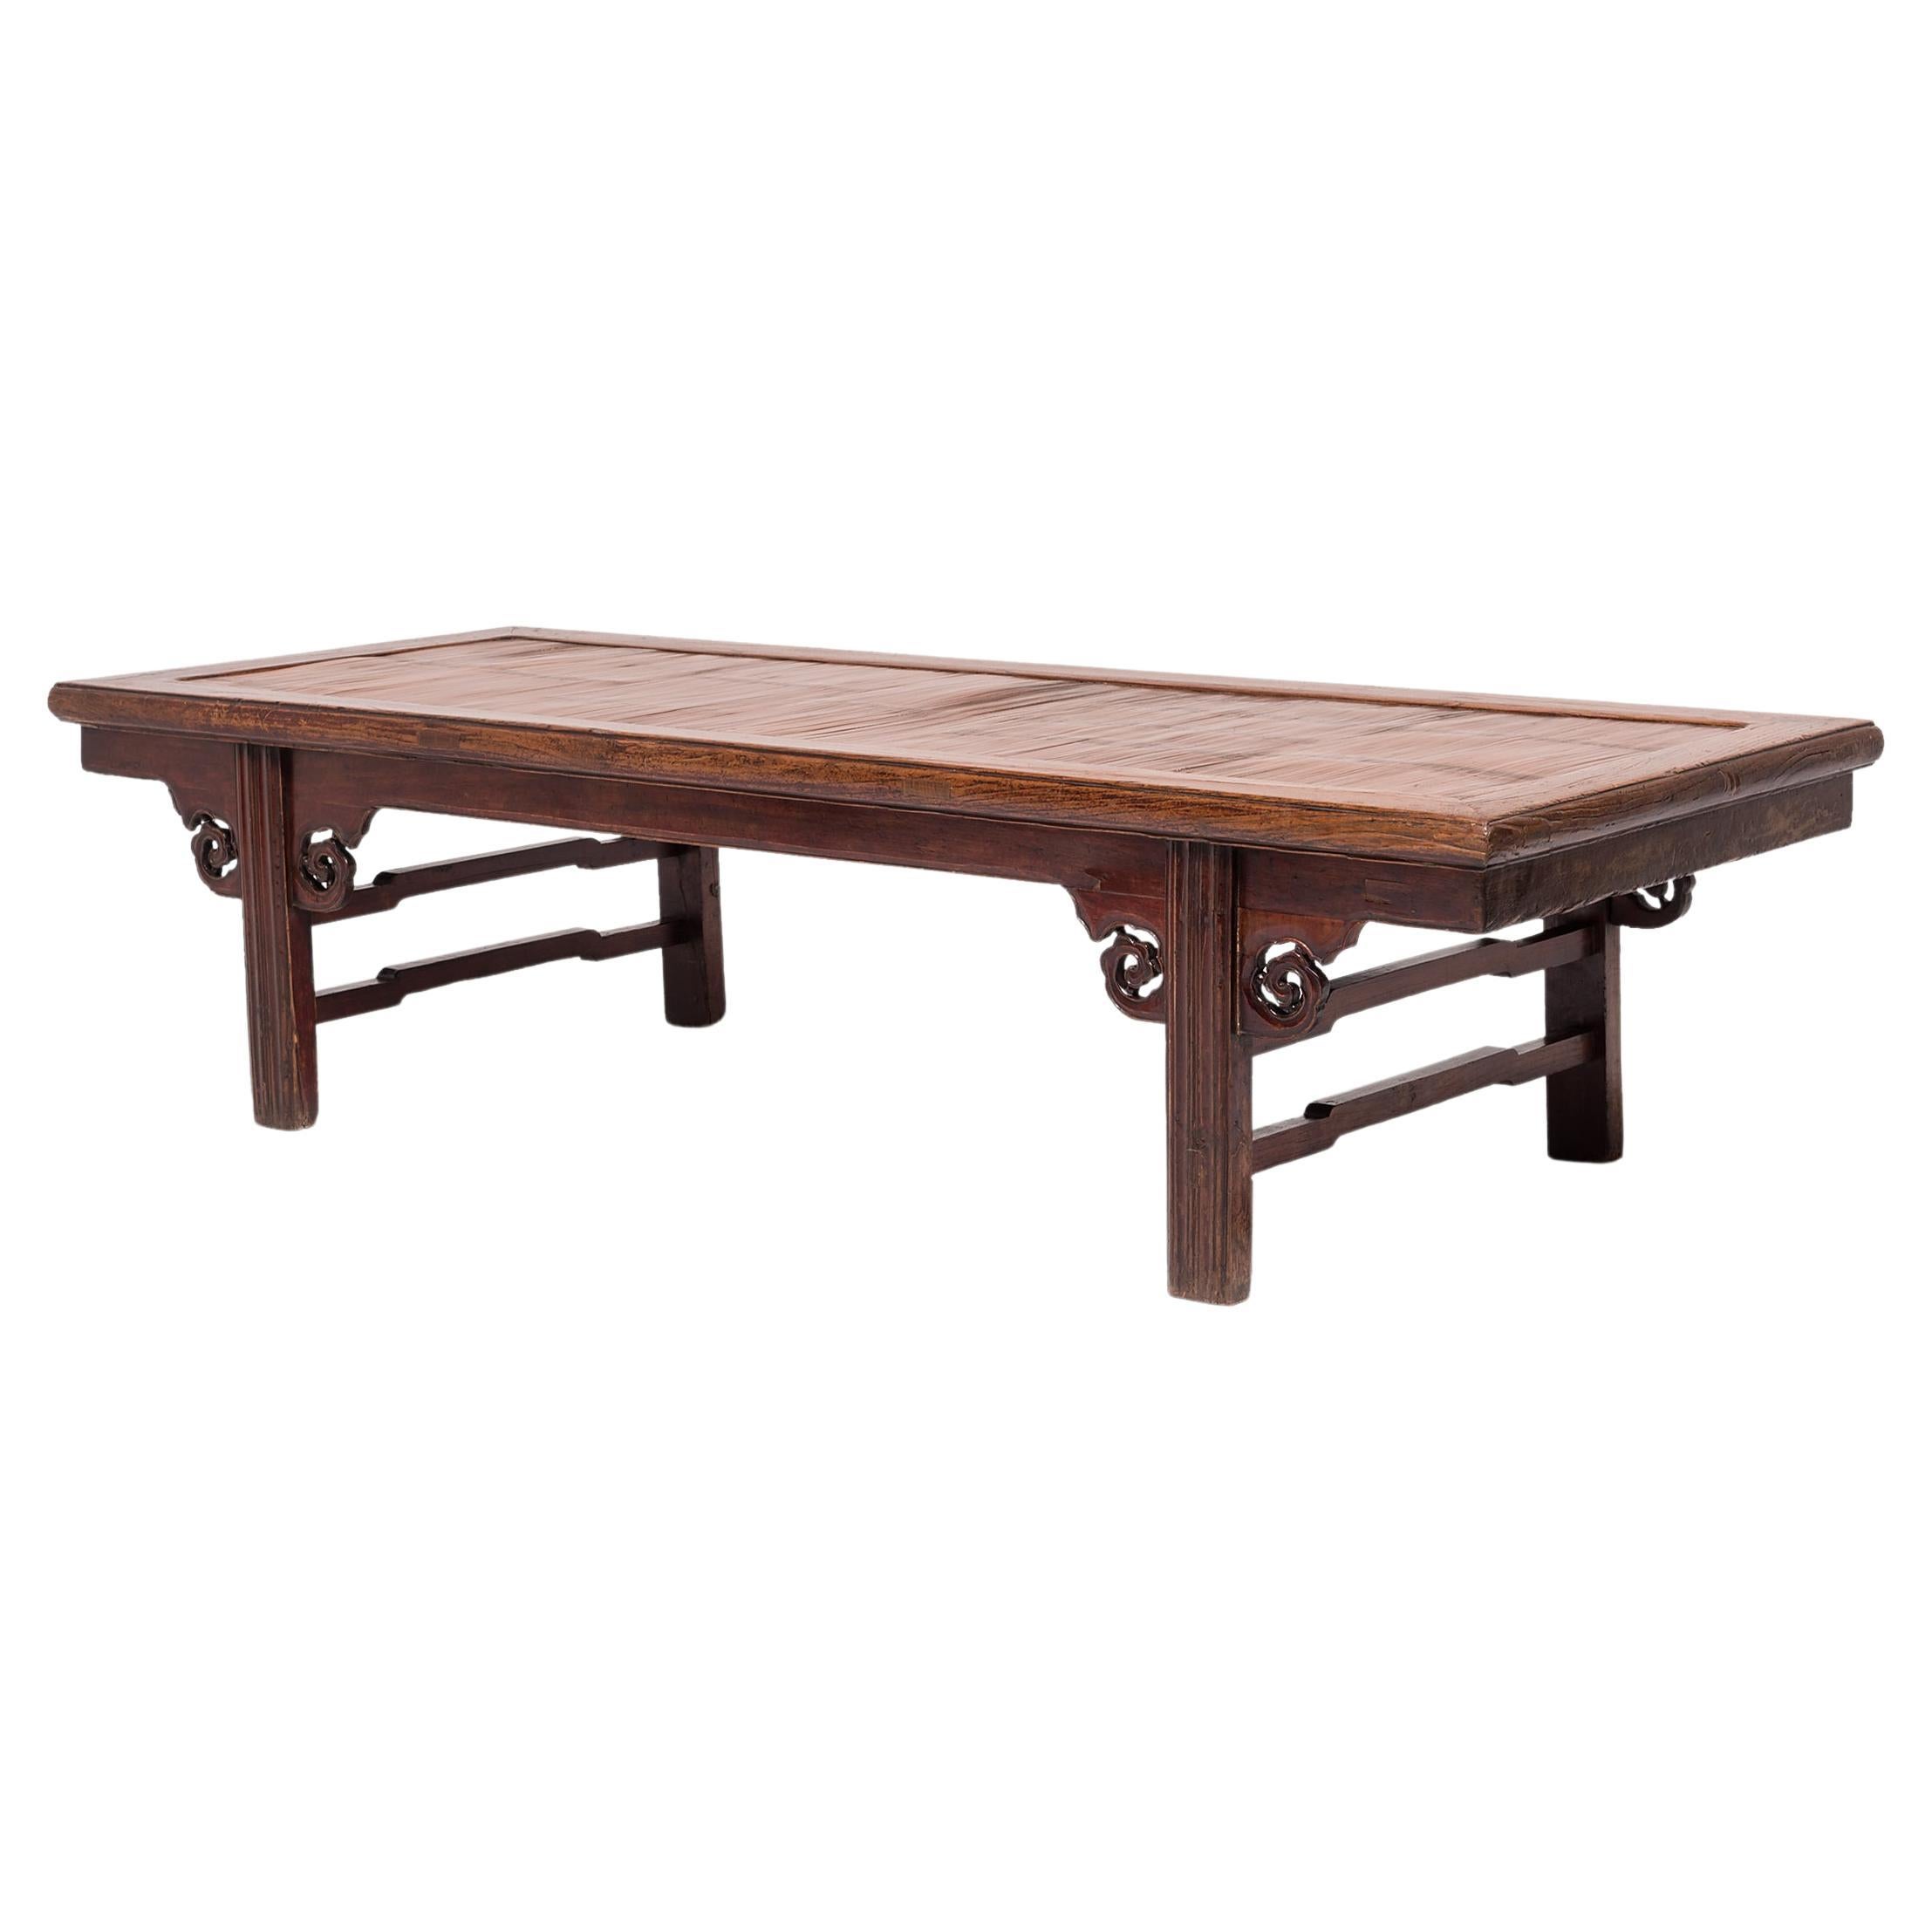 Low Chinese Kang Table with Spiral Spandrels, c. 1850 For Sale